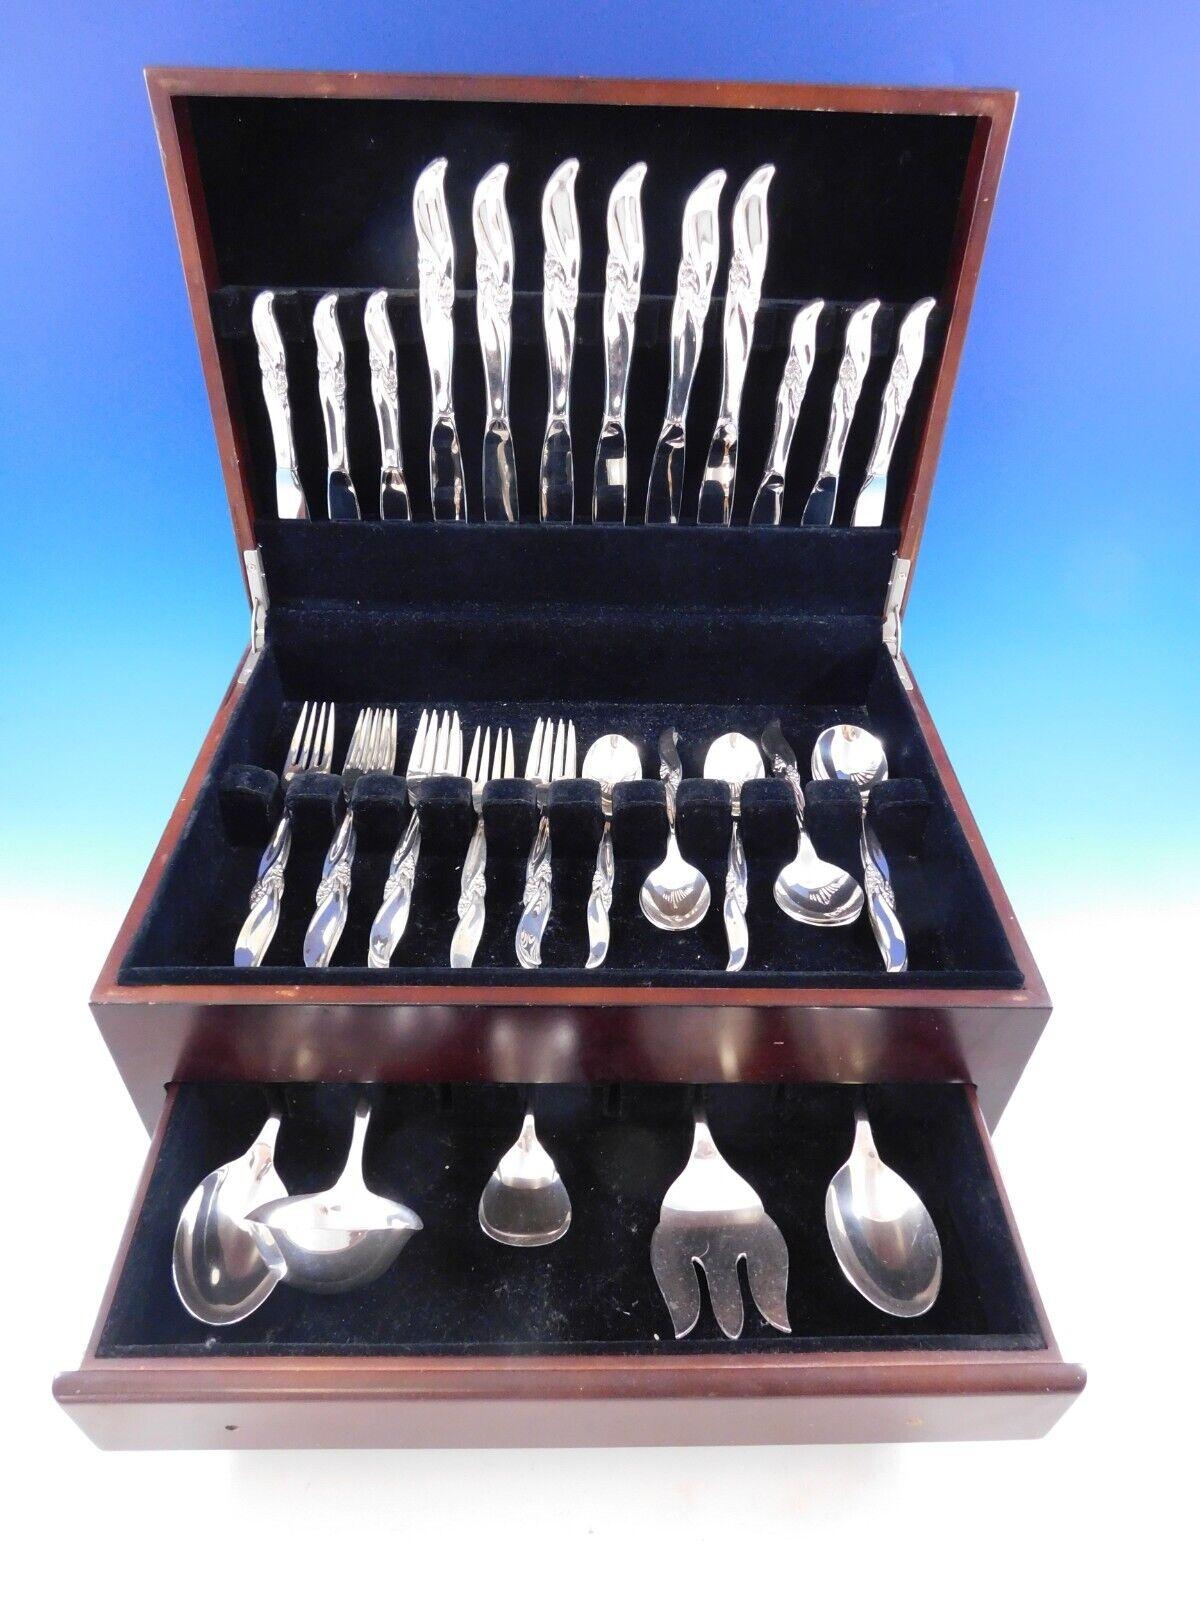 Lake Louise by Northumbria Canada sterling silver flatware set - 41 pieces. This set includes:
6 knives, 9 1/4